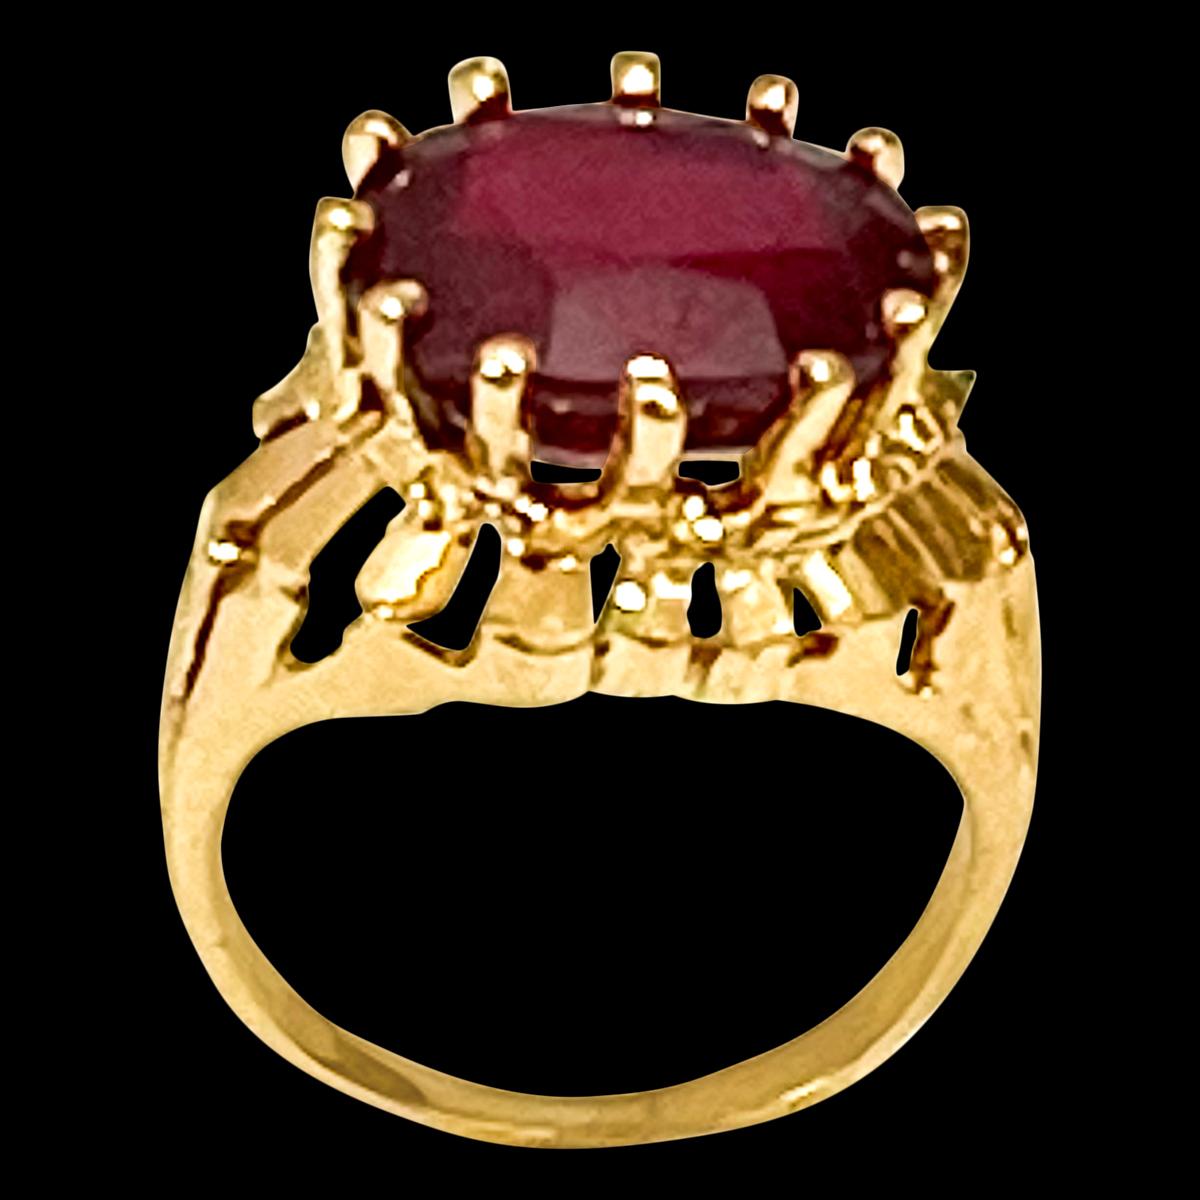  Oval  Cut  7 Carat Treated Ruby in 18 Karat Yellow Gold Ring, Unisex Size 5.5
It is a Unisex ring 
Its a treated ruby prong set, Multiple prongs are breath taking.
18 Karat Yellow Gold: 7.2 gram
Ring Size 5.5 ( can be altered for no charge